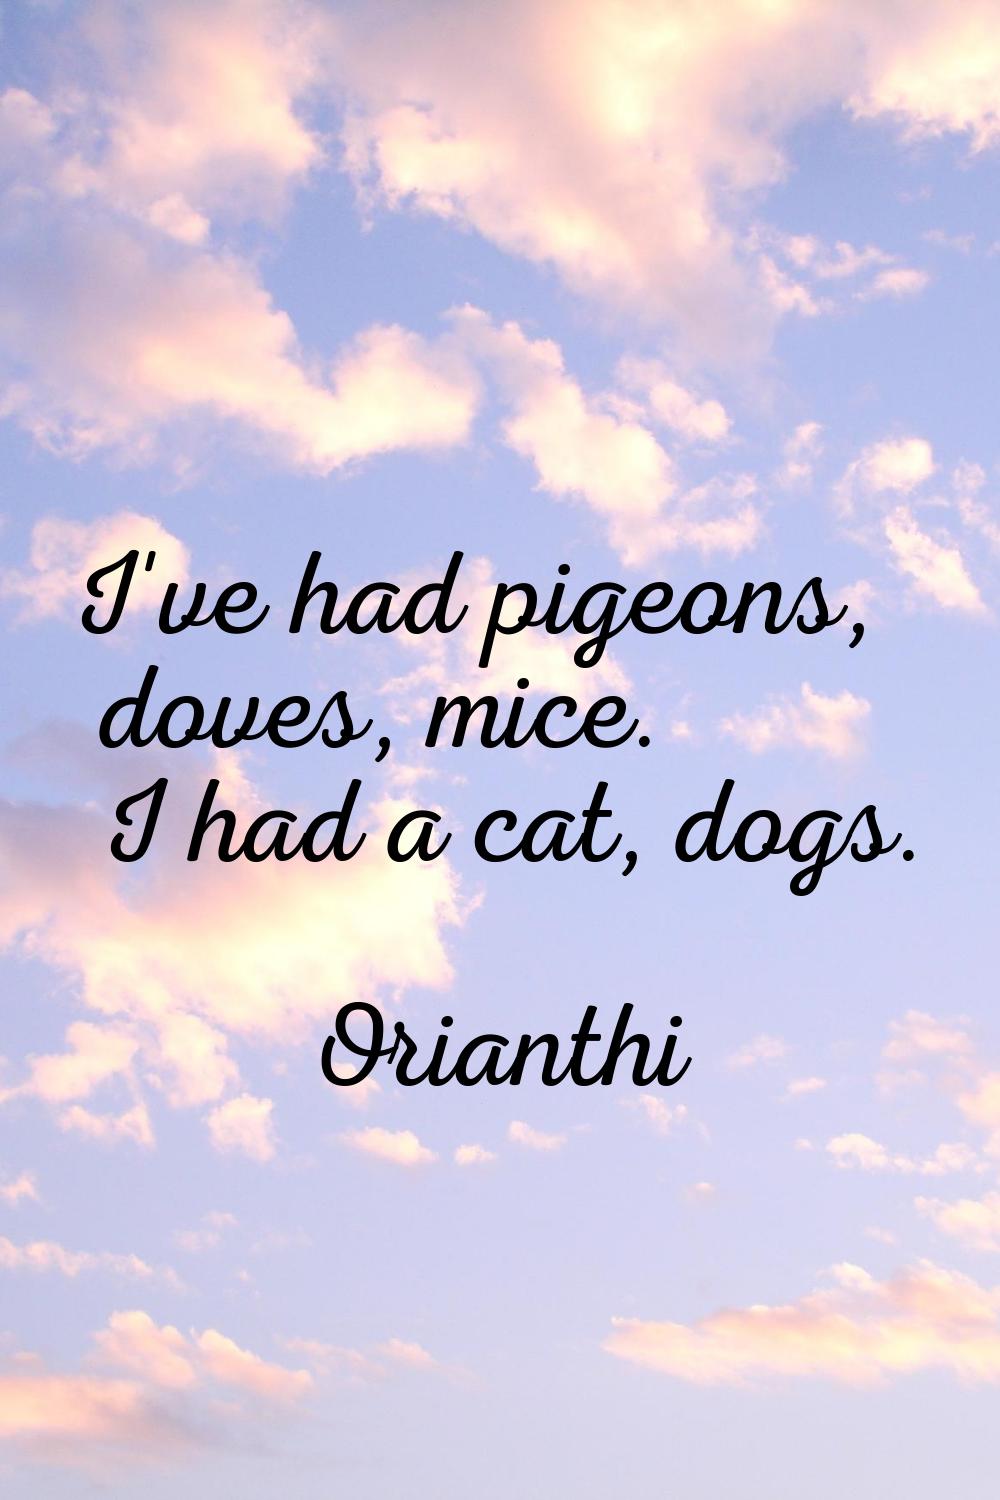 I've had pigeons, doves, mice. I had a cat, dogs.